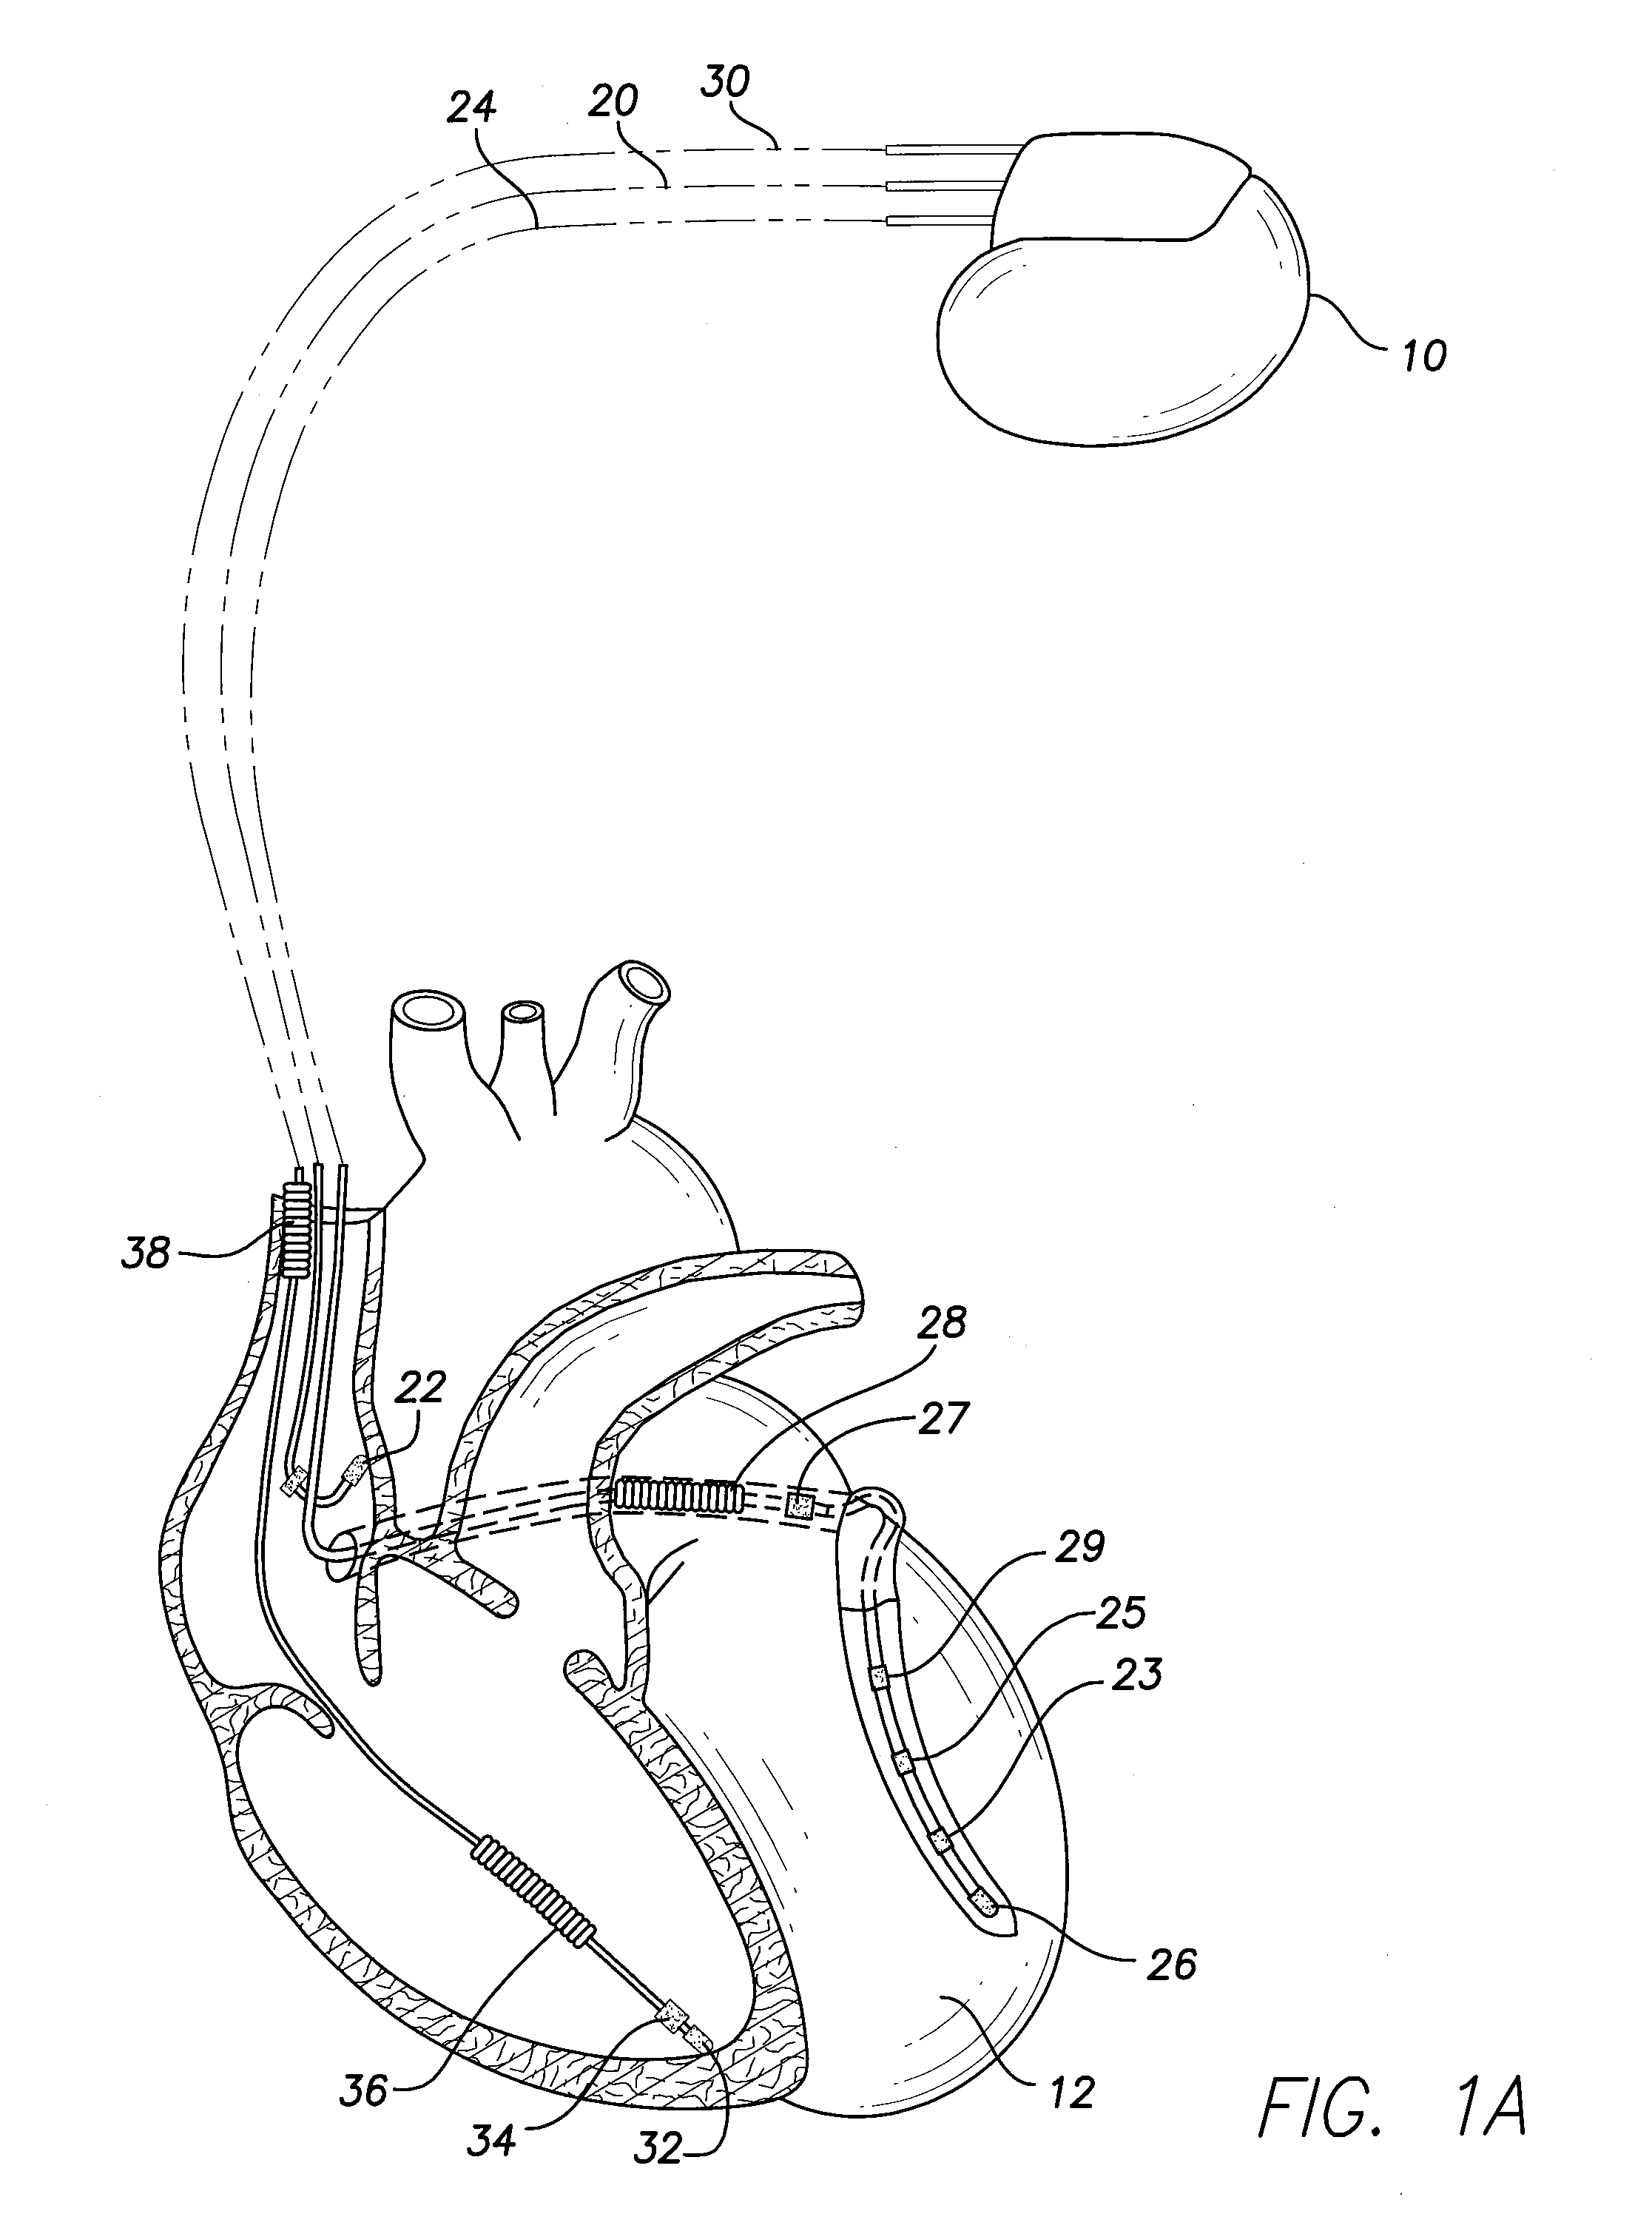 System and Method for ATP Treatment Utilizing Multi-Electrode Left Ventricular Lead